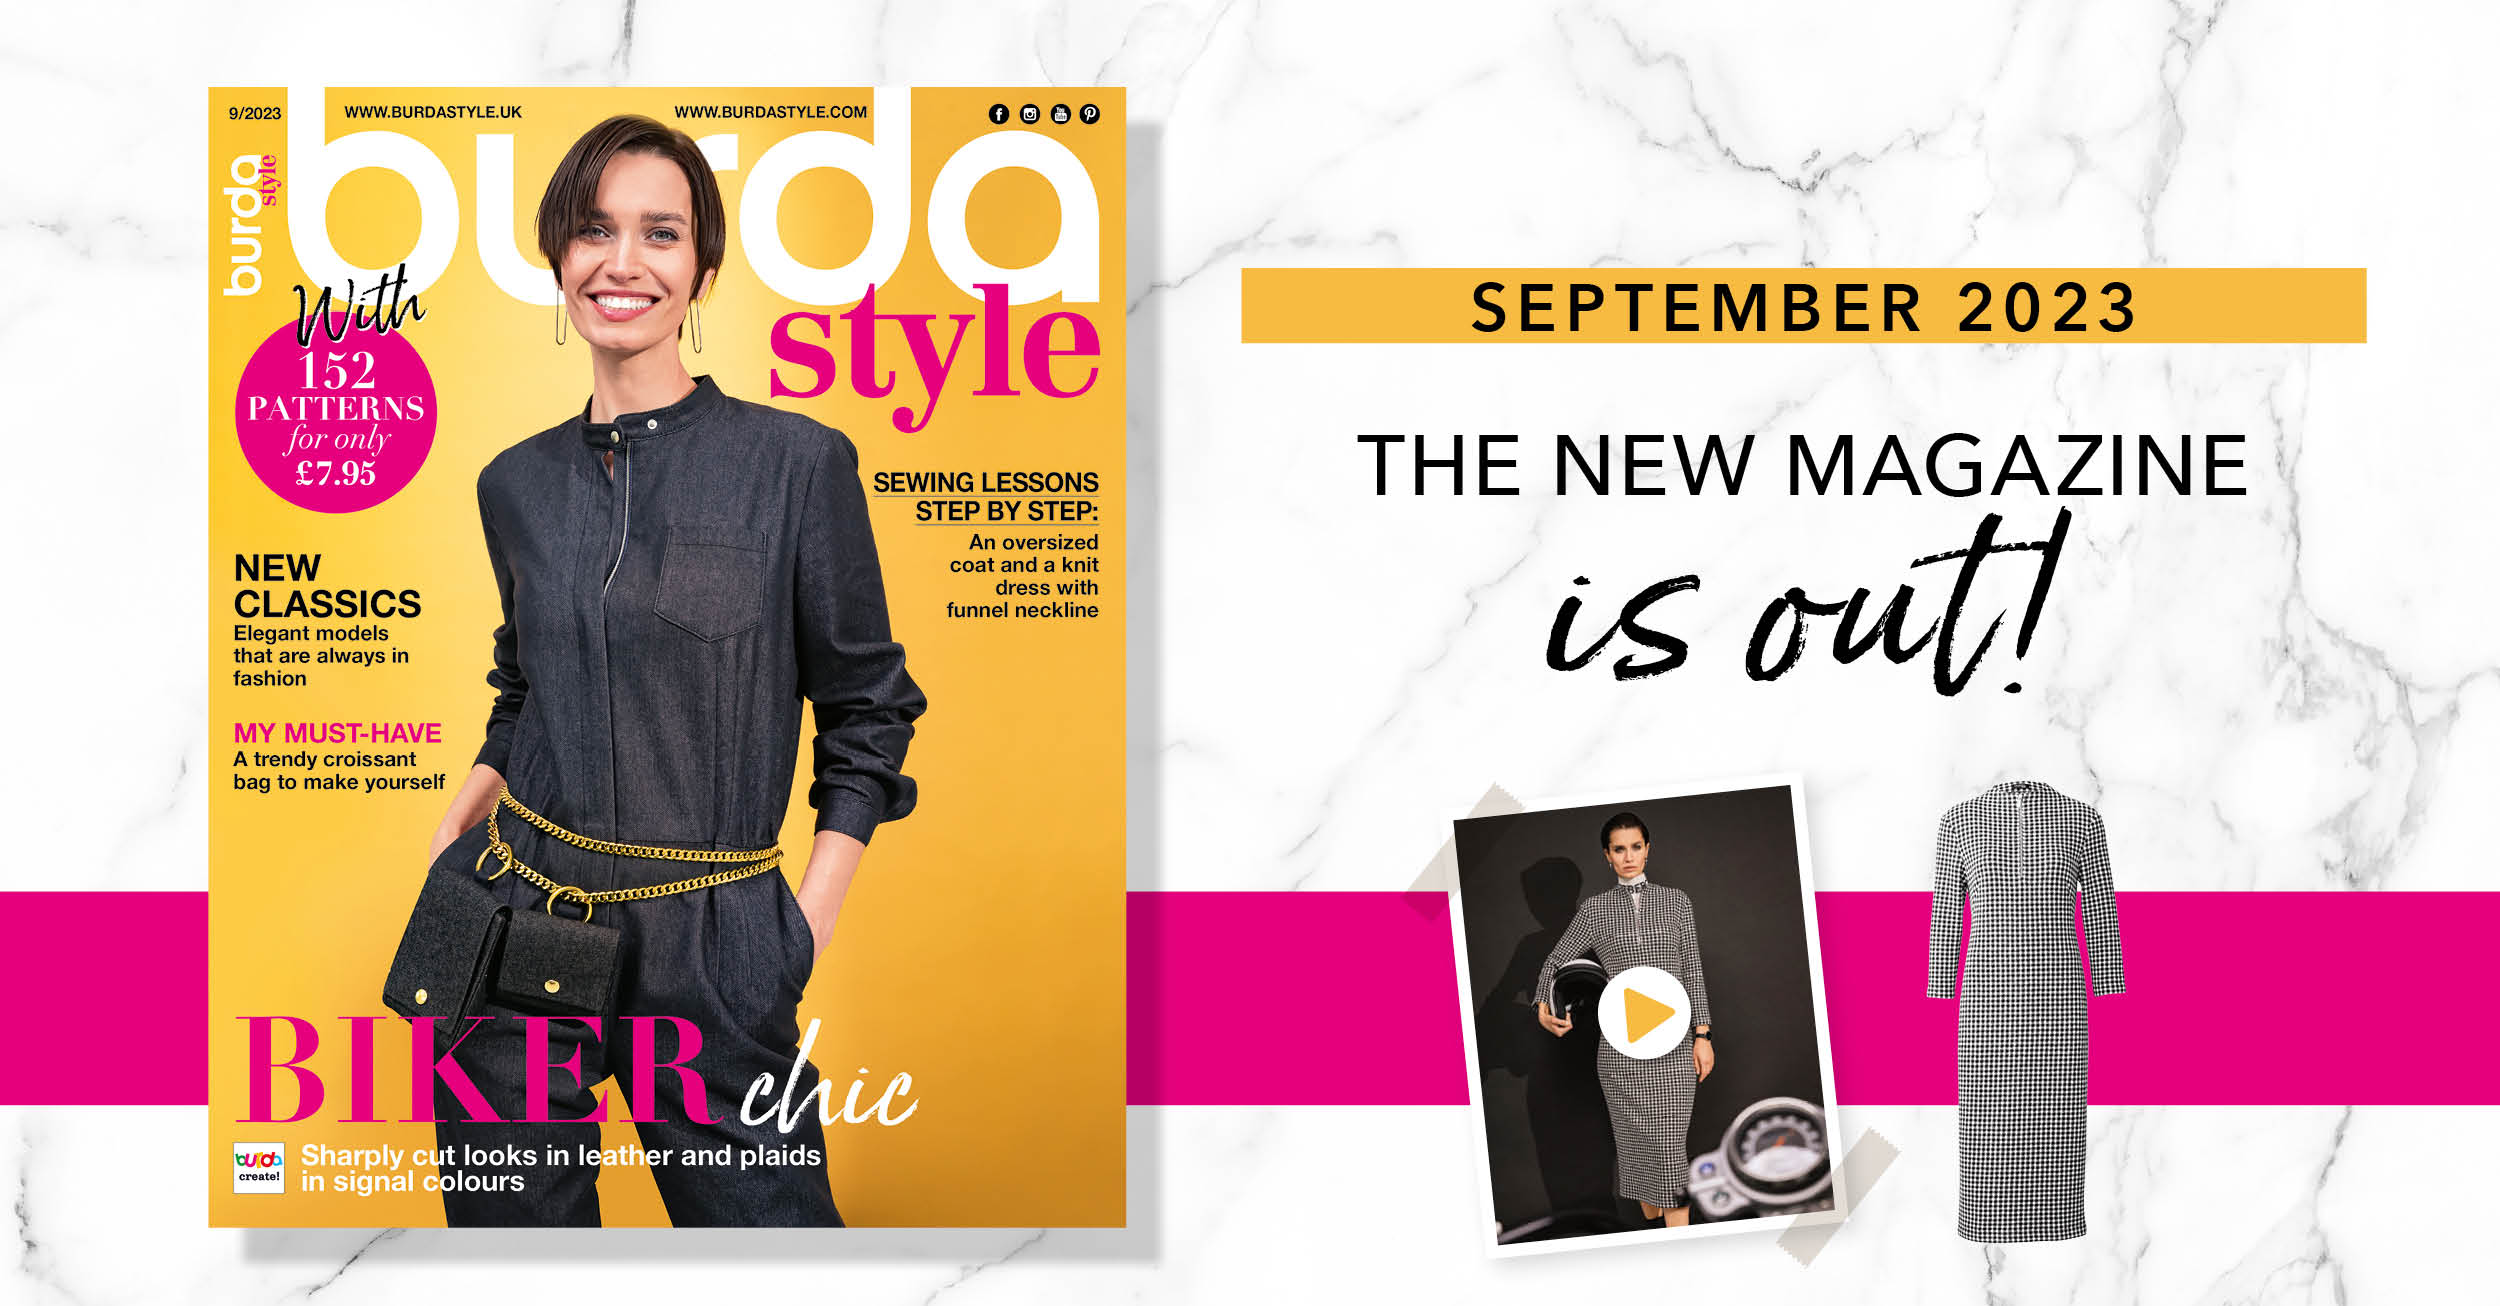 September 2023: The New Issue of Burda Style!